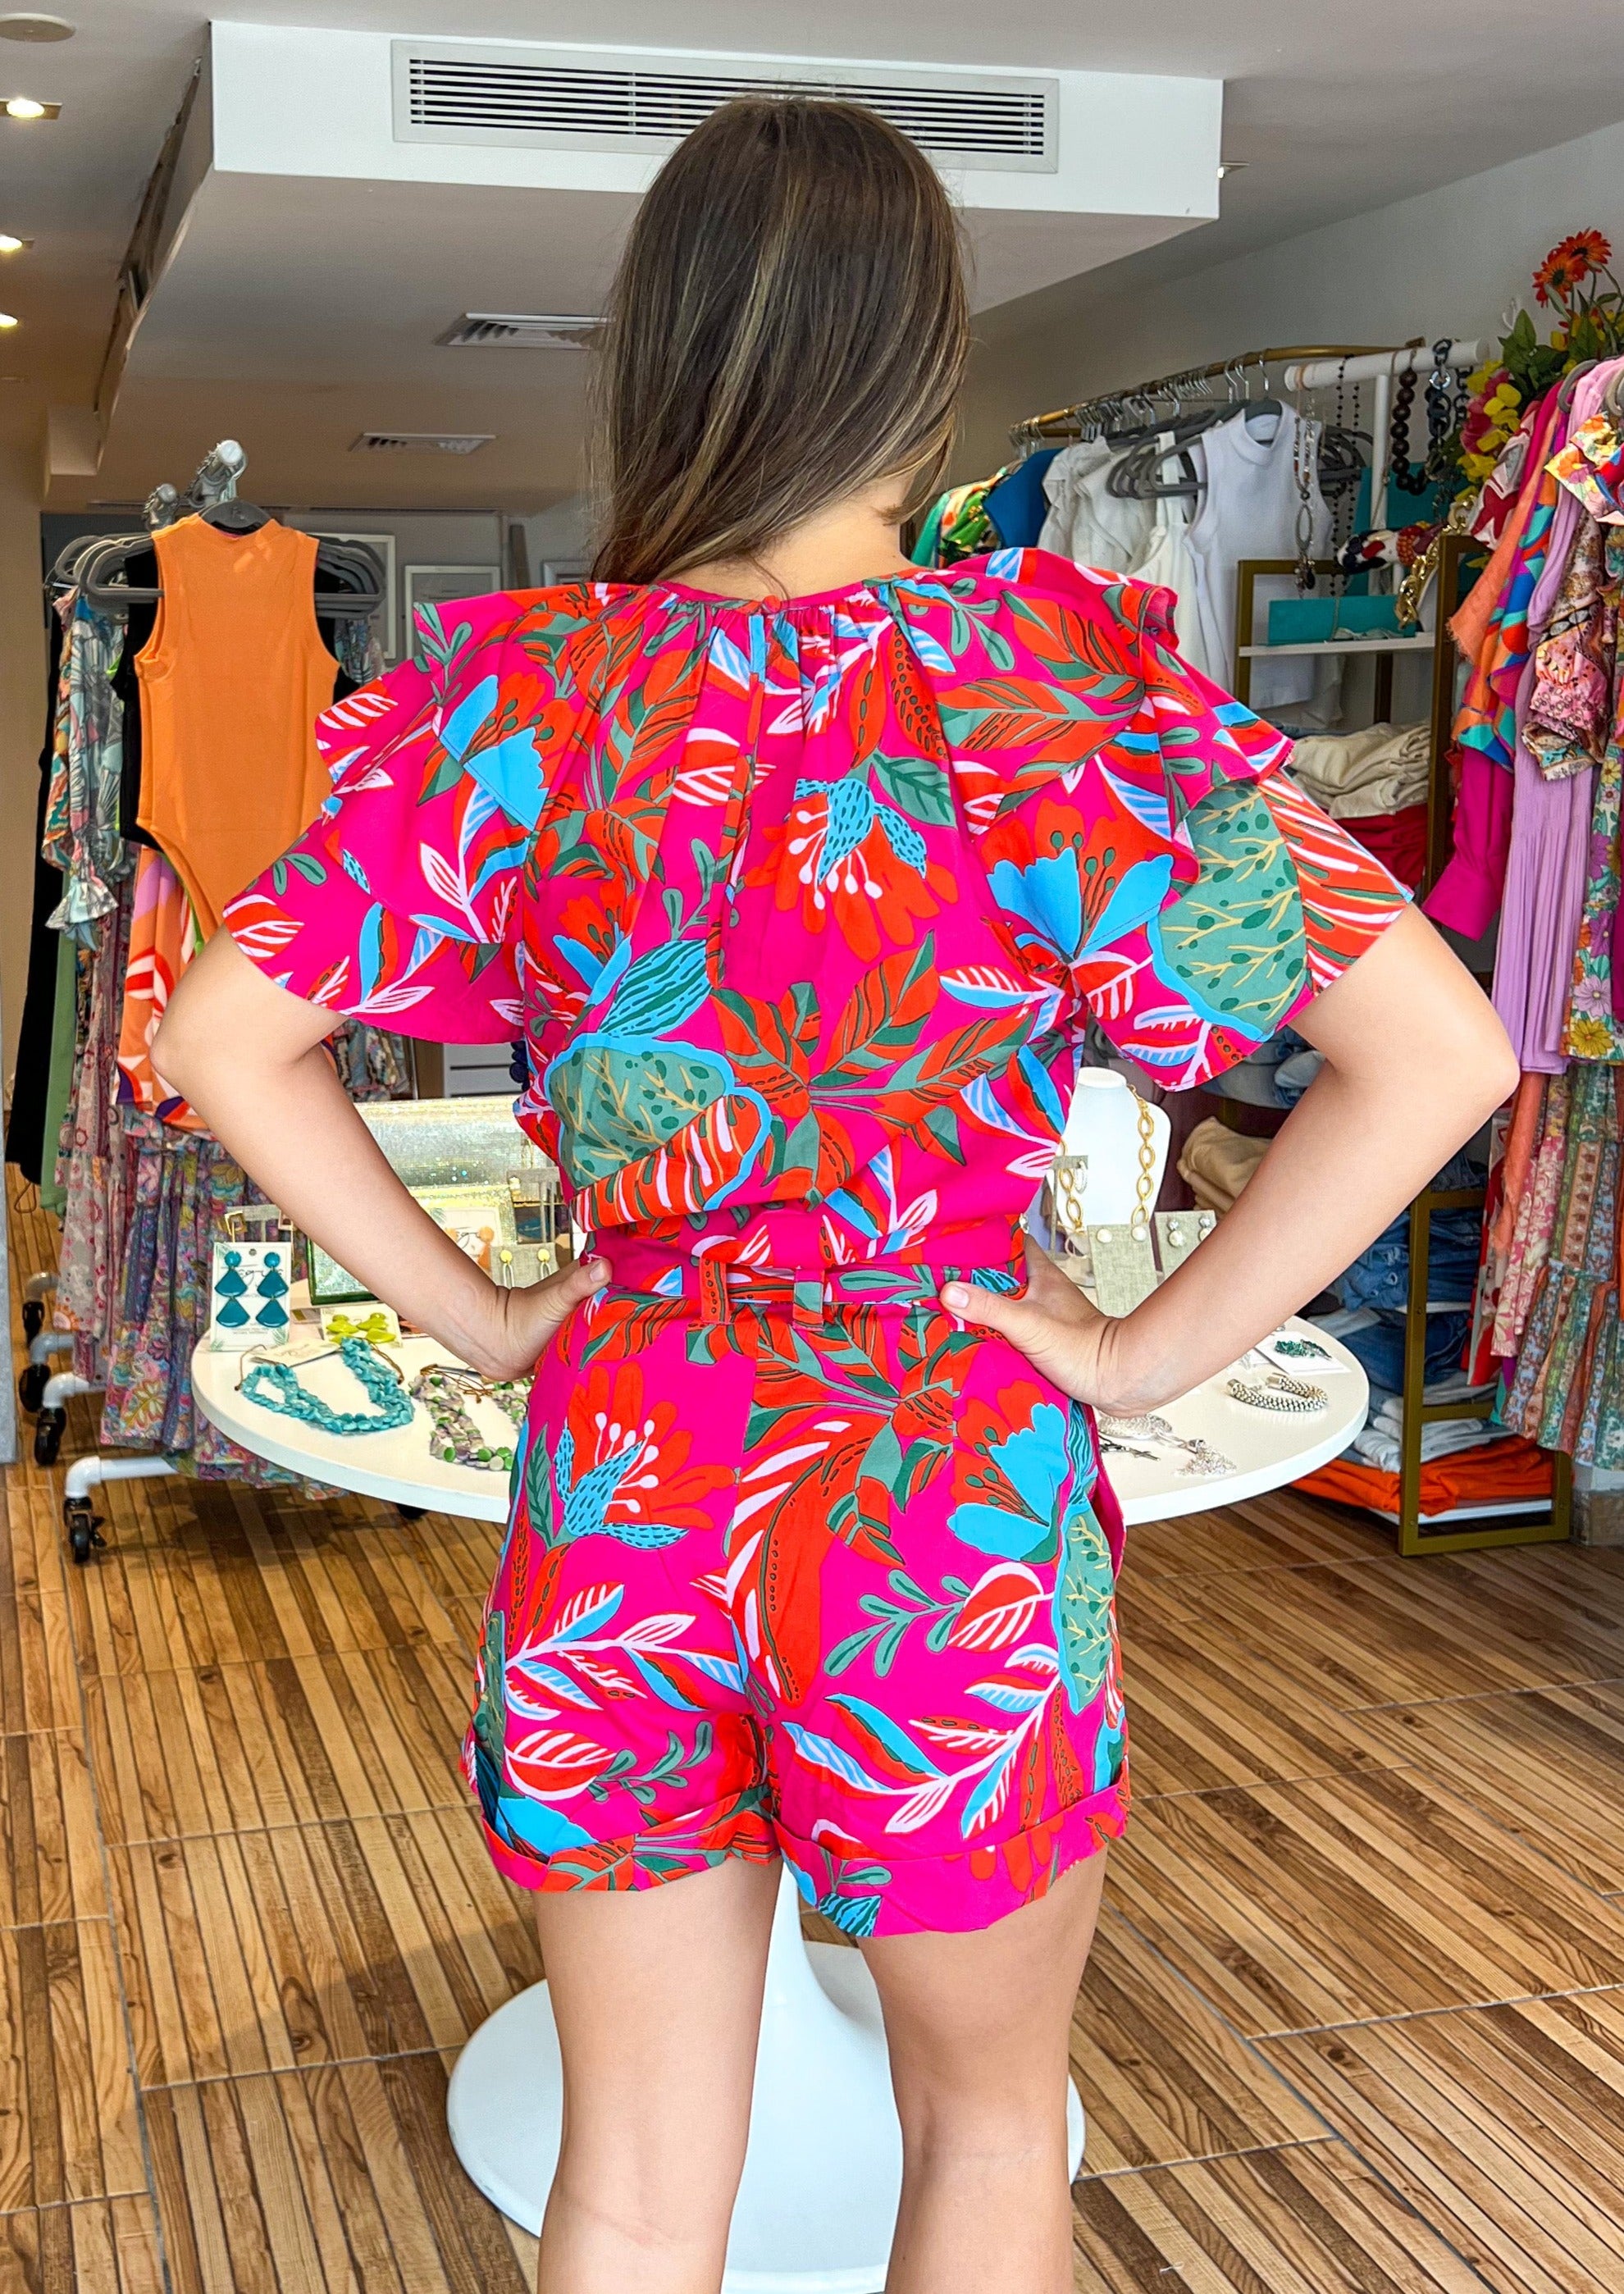 Have some fun in the sun in the Cactus Blossom Blouse. Decorated with a mix of vibrant florals.It features a classic round neckline framed by dolman ruffle layered sleeves. It maintains a straight frame and can be styled tucked in. Take on the summer in these vibrant, mixed floral print shorts. Made of a lightweight and breathable cotton fabric, the shorts sit high on the waist with a self tie belt. They maintain a comfortable loose fit throughout the hips and legs.